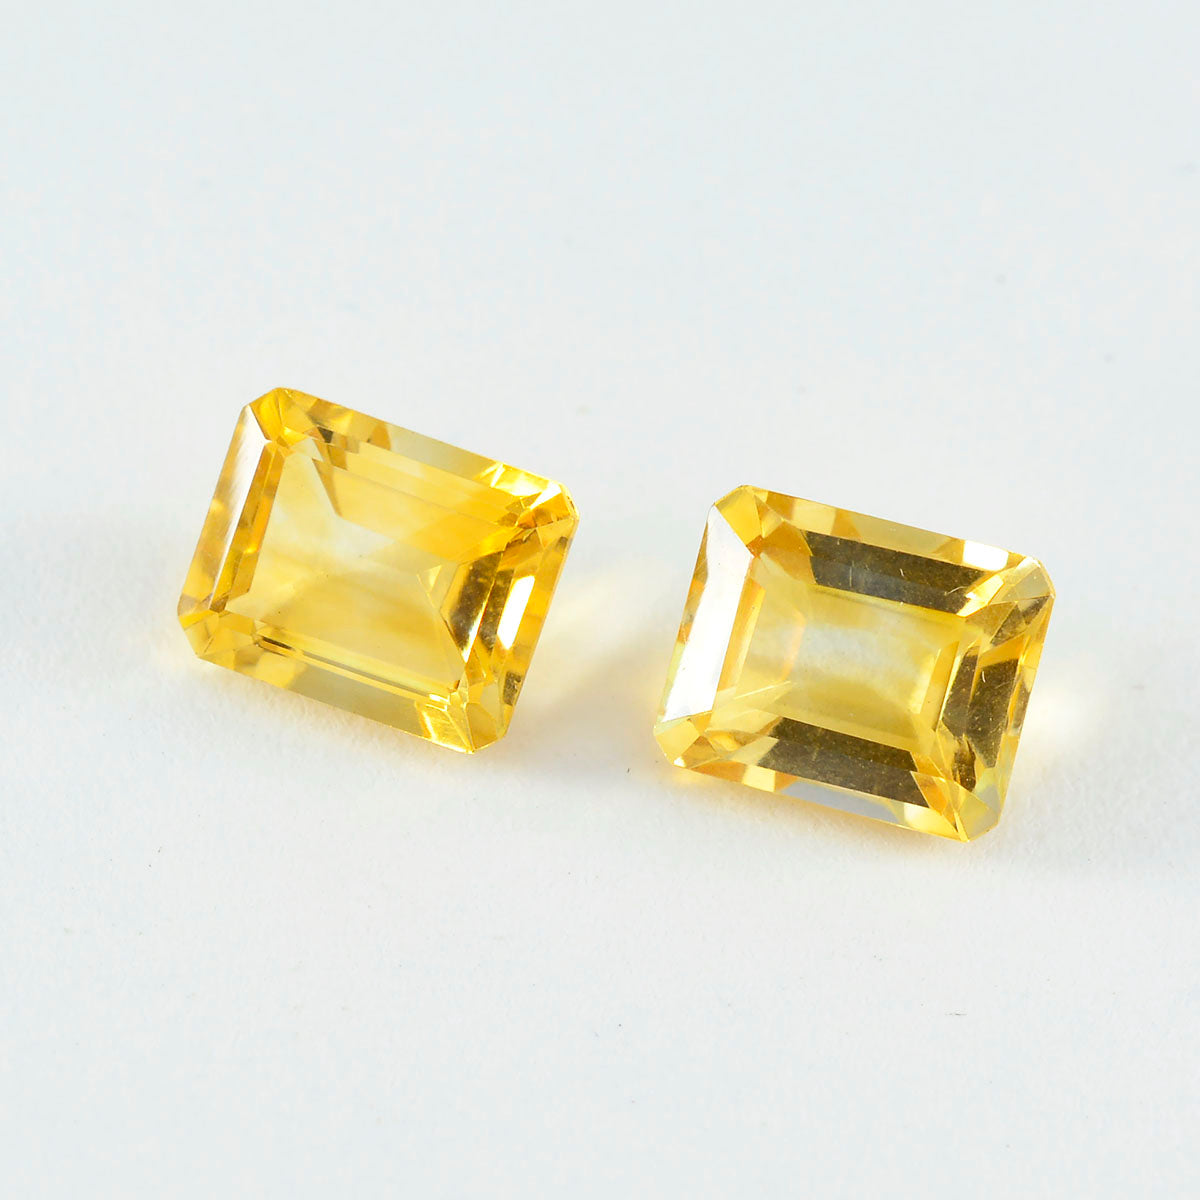 Riyogems 1PC Natural Yellow Citrine Faceted 10x14 mm Octagon Shape great Quality Gemstone